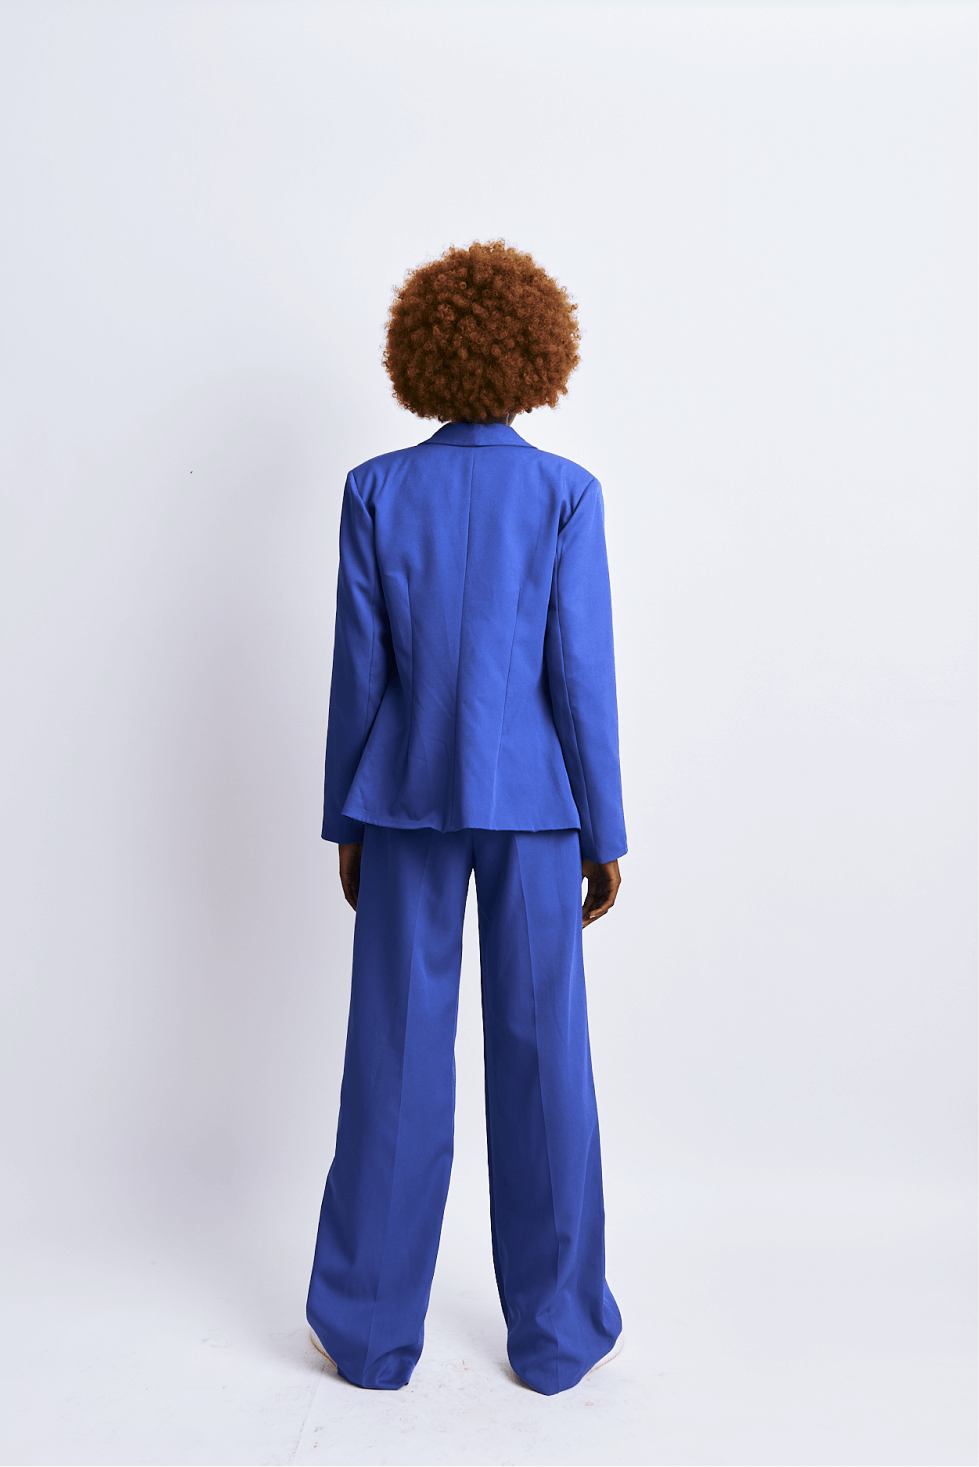 Royal Blue Palazzo Pants - Trousers, Pants & Shorts by The Fashion Frenzy. Shop on Arrai now! From top to bottom, we've got you covered with this season's perfect pair of full length official trousers. Mix, match and switch it up with stylish separates th